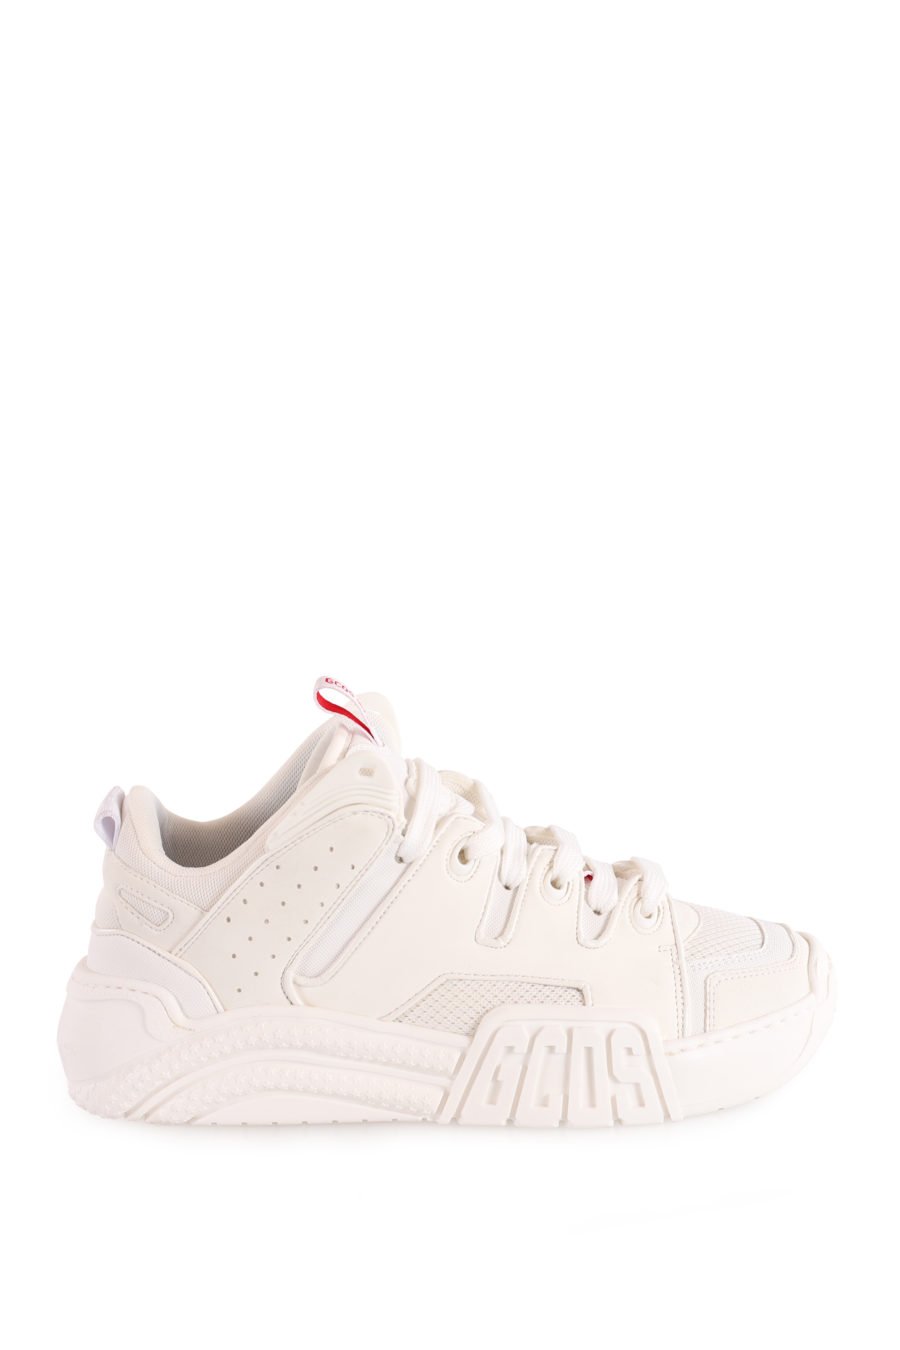 White "Skate" lace-up trainers - a7ee95037846348e1337b2f3df0a7ca324fceac1